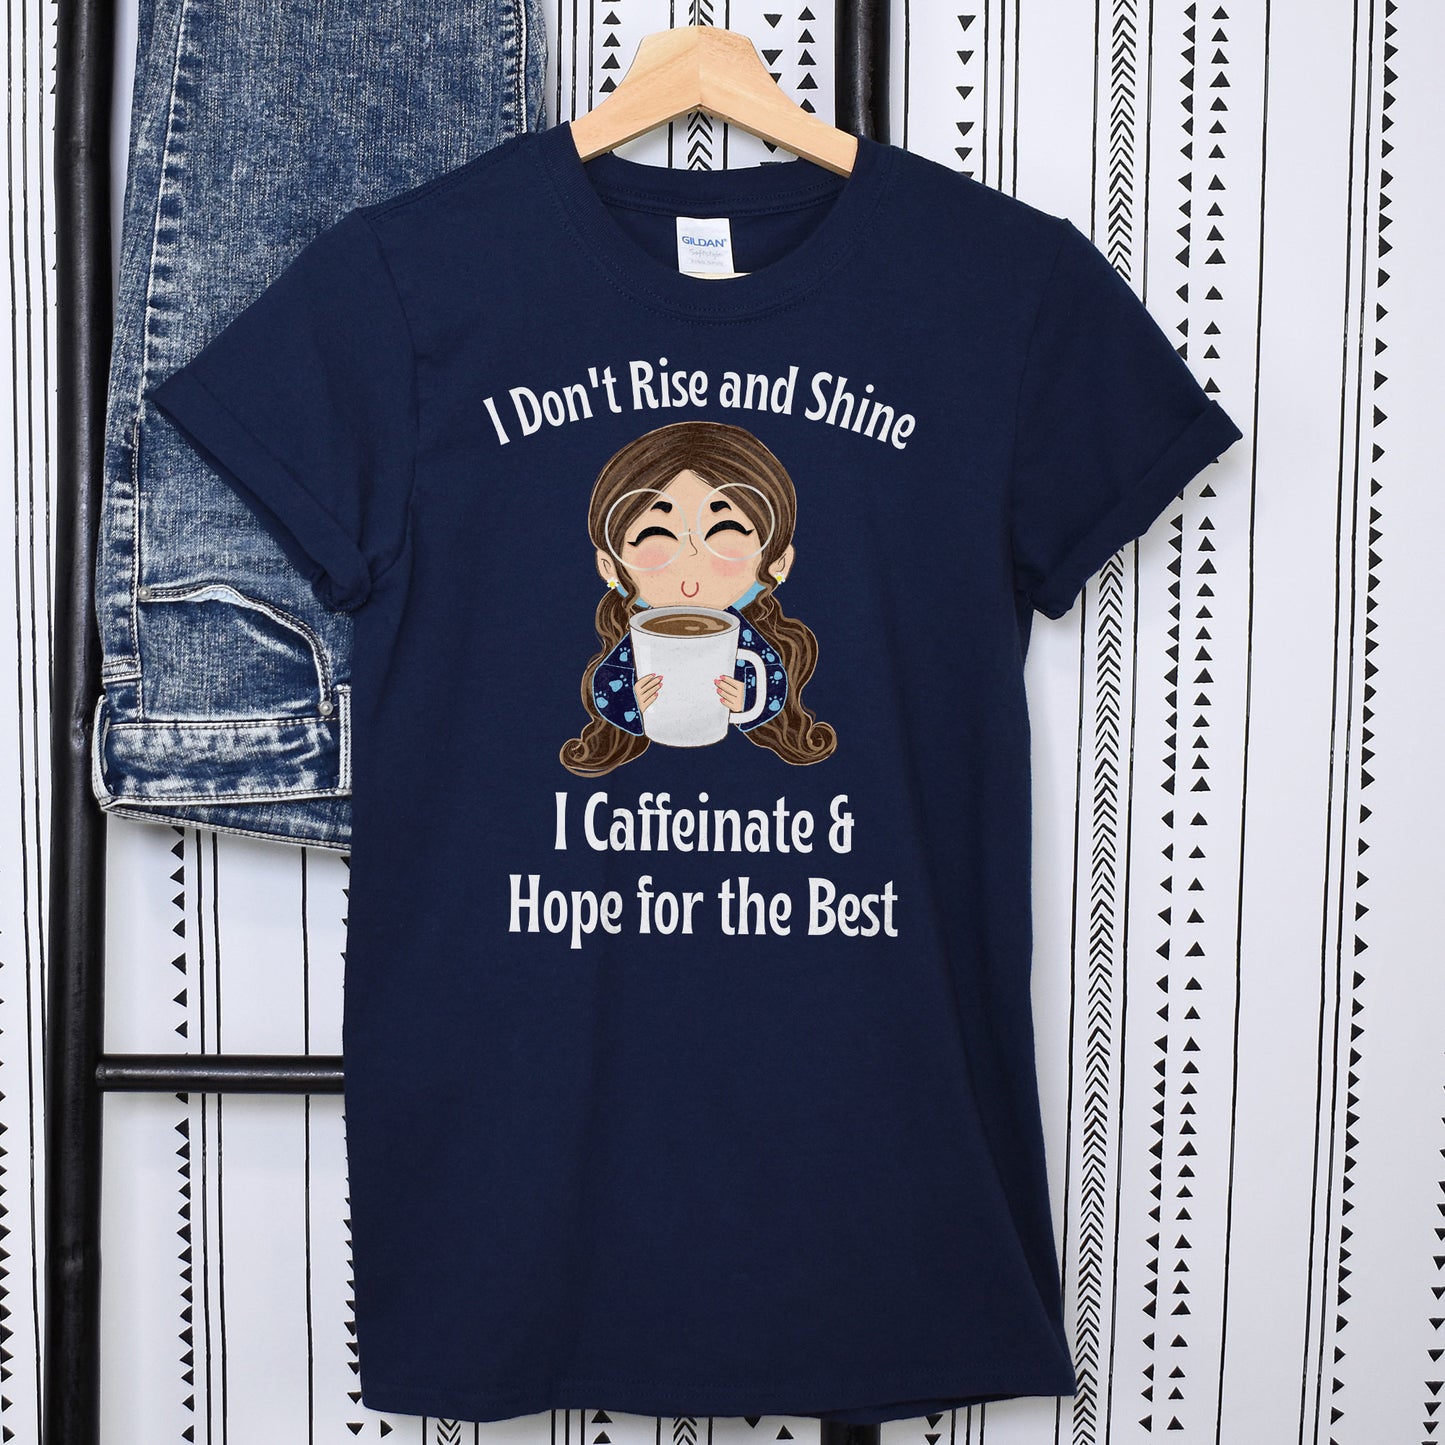 Coffee Lovers Shirt, Funny Coffee Shirt, Funny Gift, Coffee Lover Gift, Rise and Shine Shirt